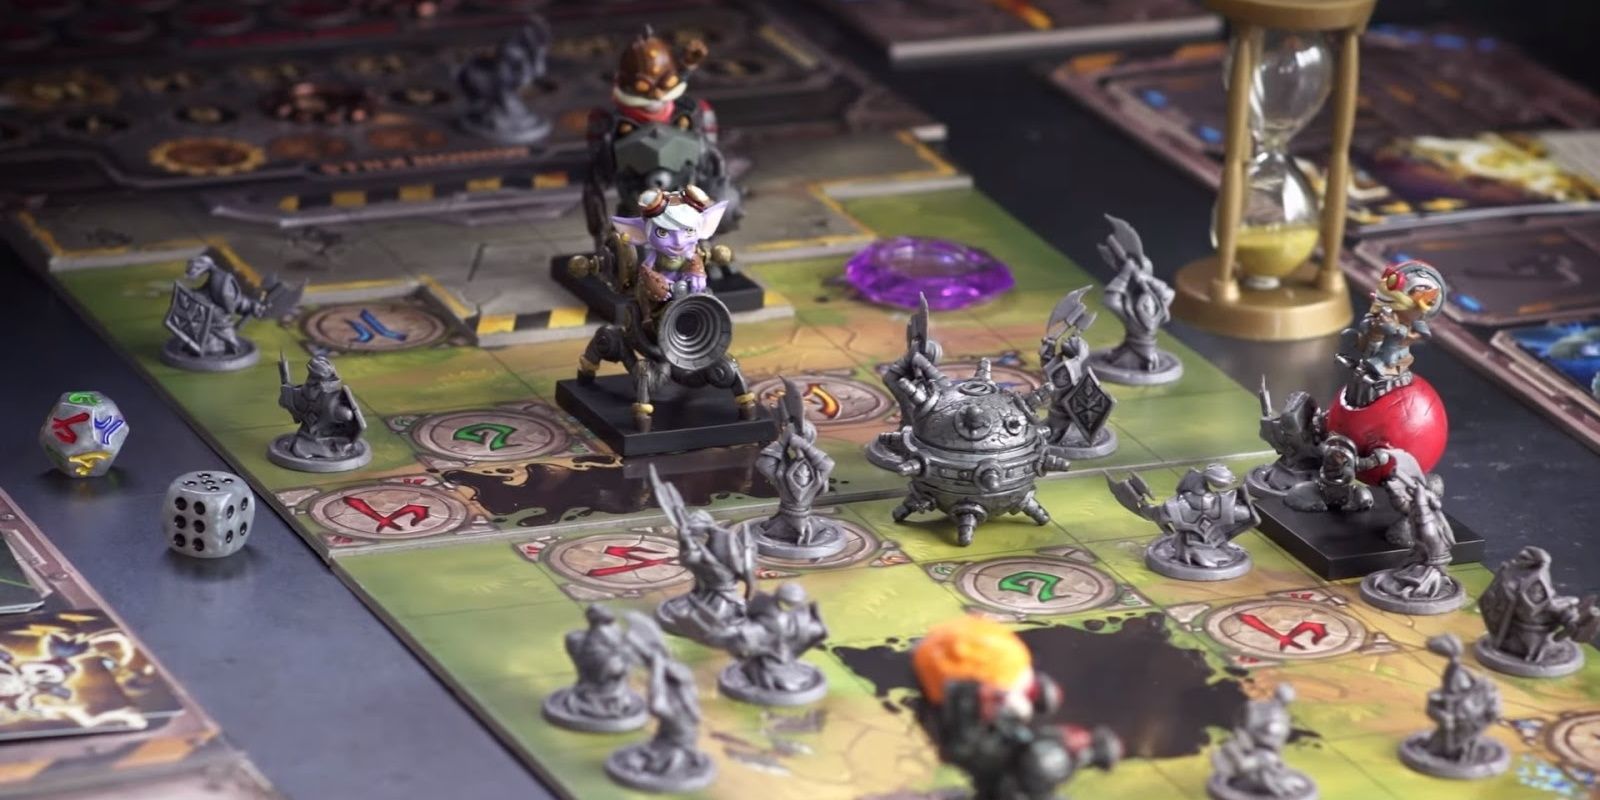 An in-progress game of Mechs vs Minions.